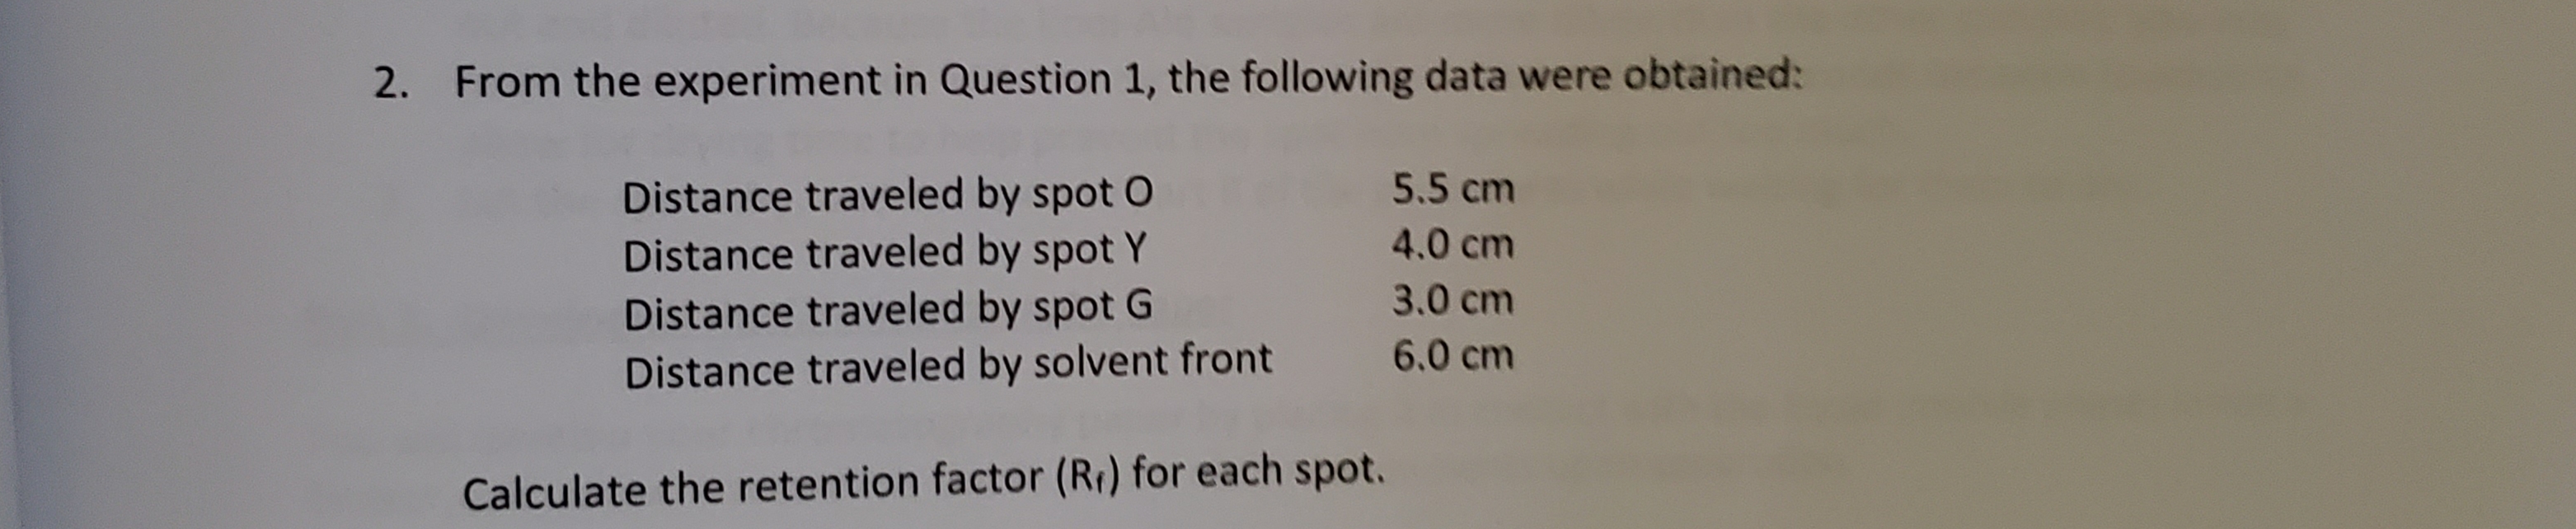 From the experiment in Question 1, the following data were obtained:
2.
Distance traveled by spot O
Distance traveled by spot Y
Distance traveled by spot G
Distance traveled by solvent front
5.5 cm
4.0 cm
3.0 cm
6.0 cm
Calculate the retention factor (Rr) for each spot.
